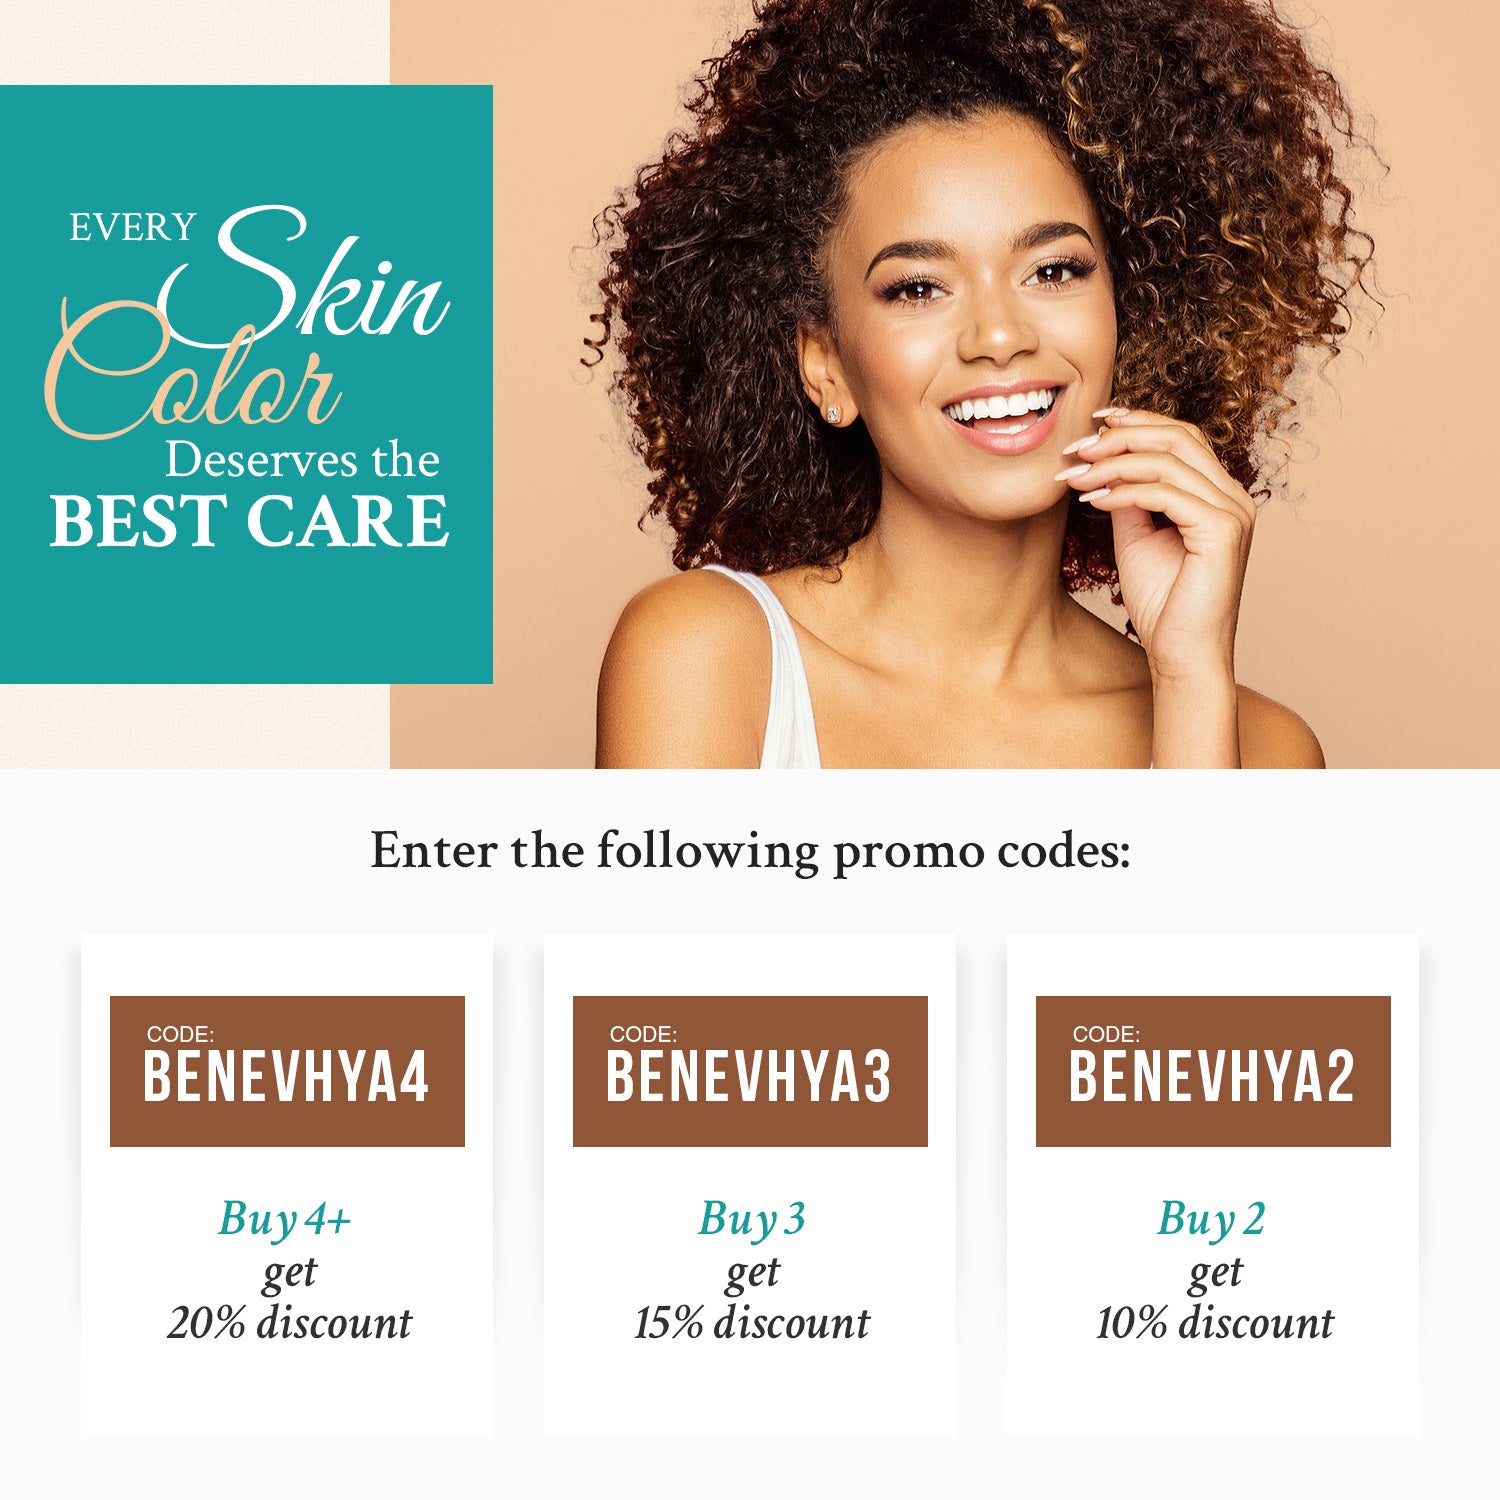 Every skin color deserves the best care